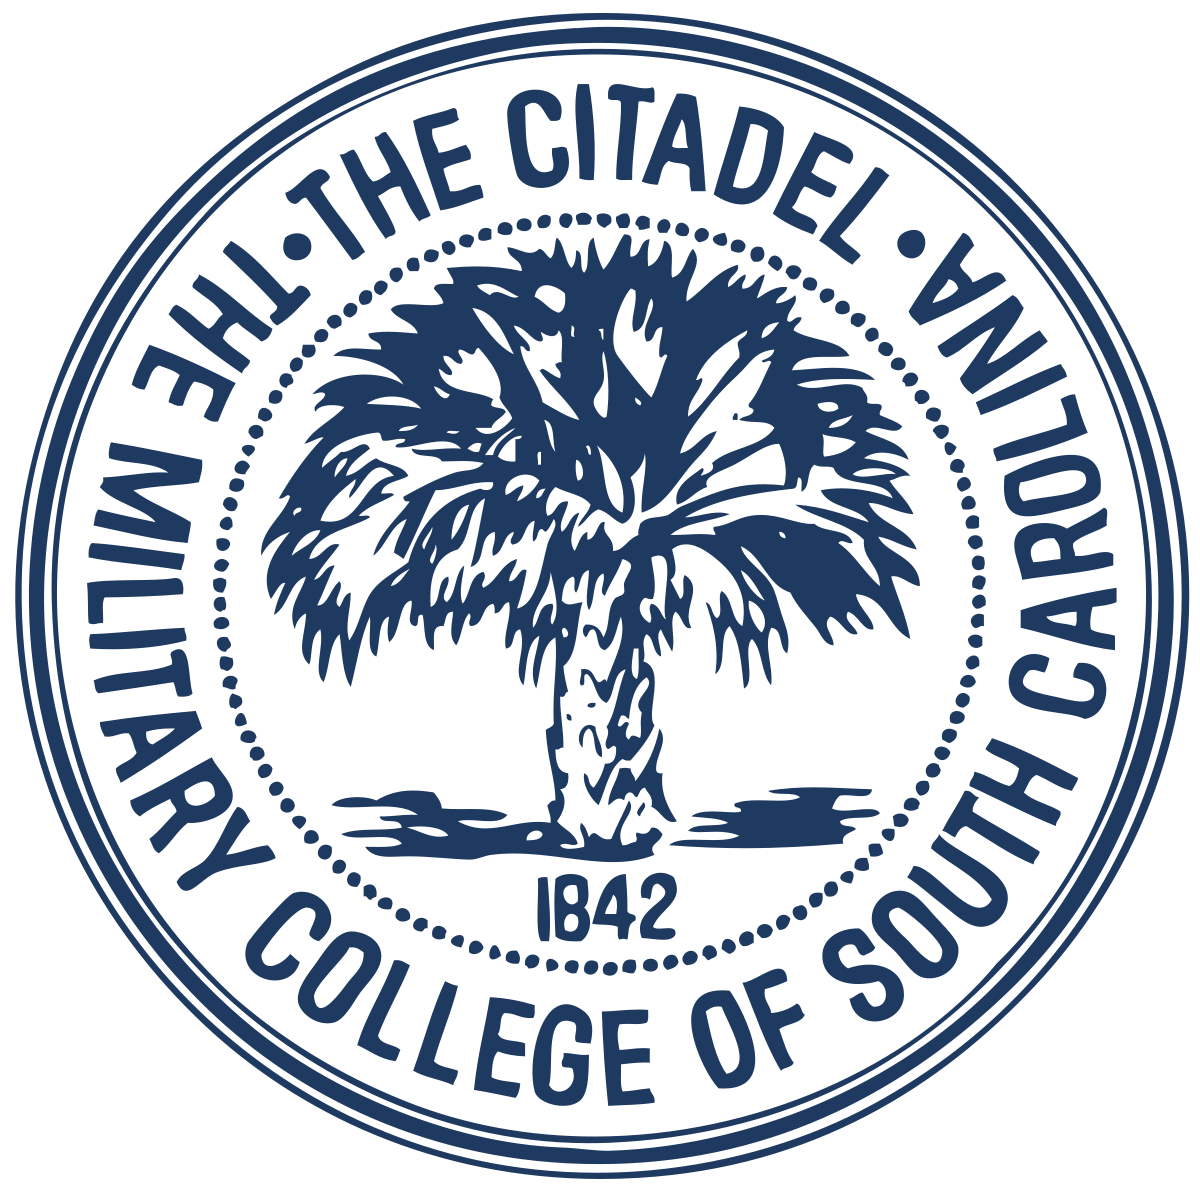 Gold White and Blue College Logo - The Citadel, The Military College of South Carolina